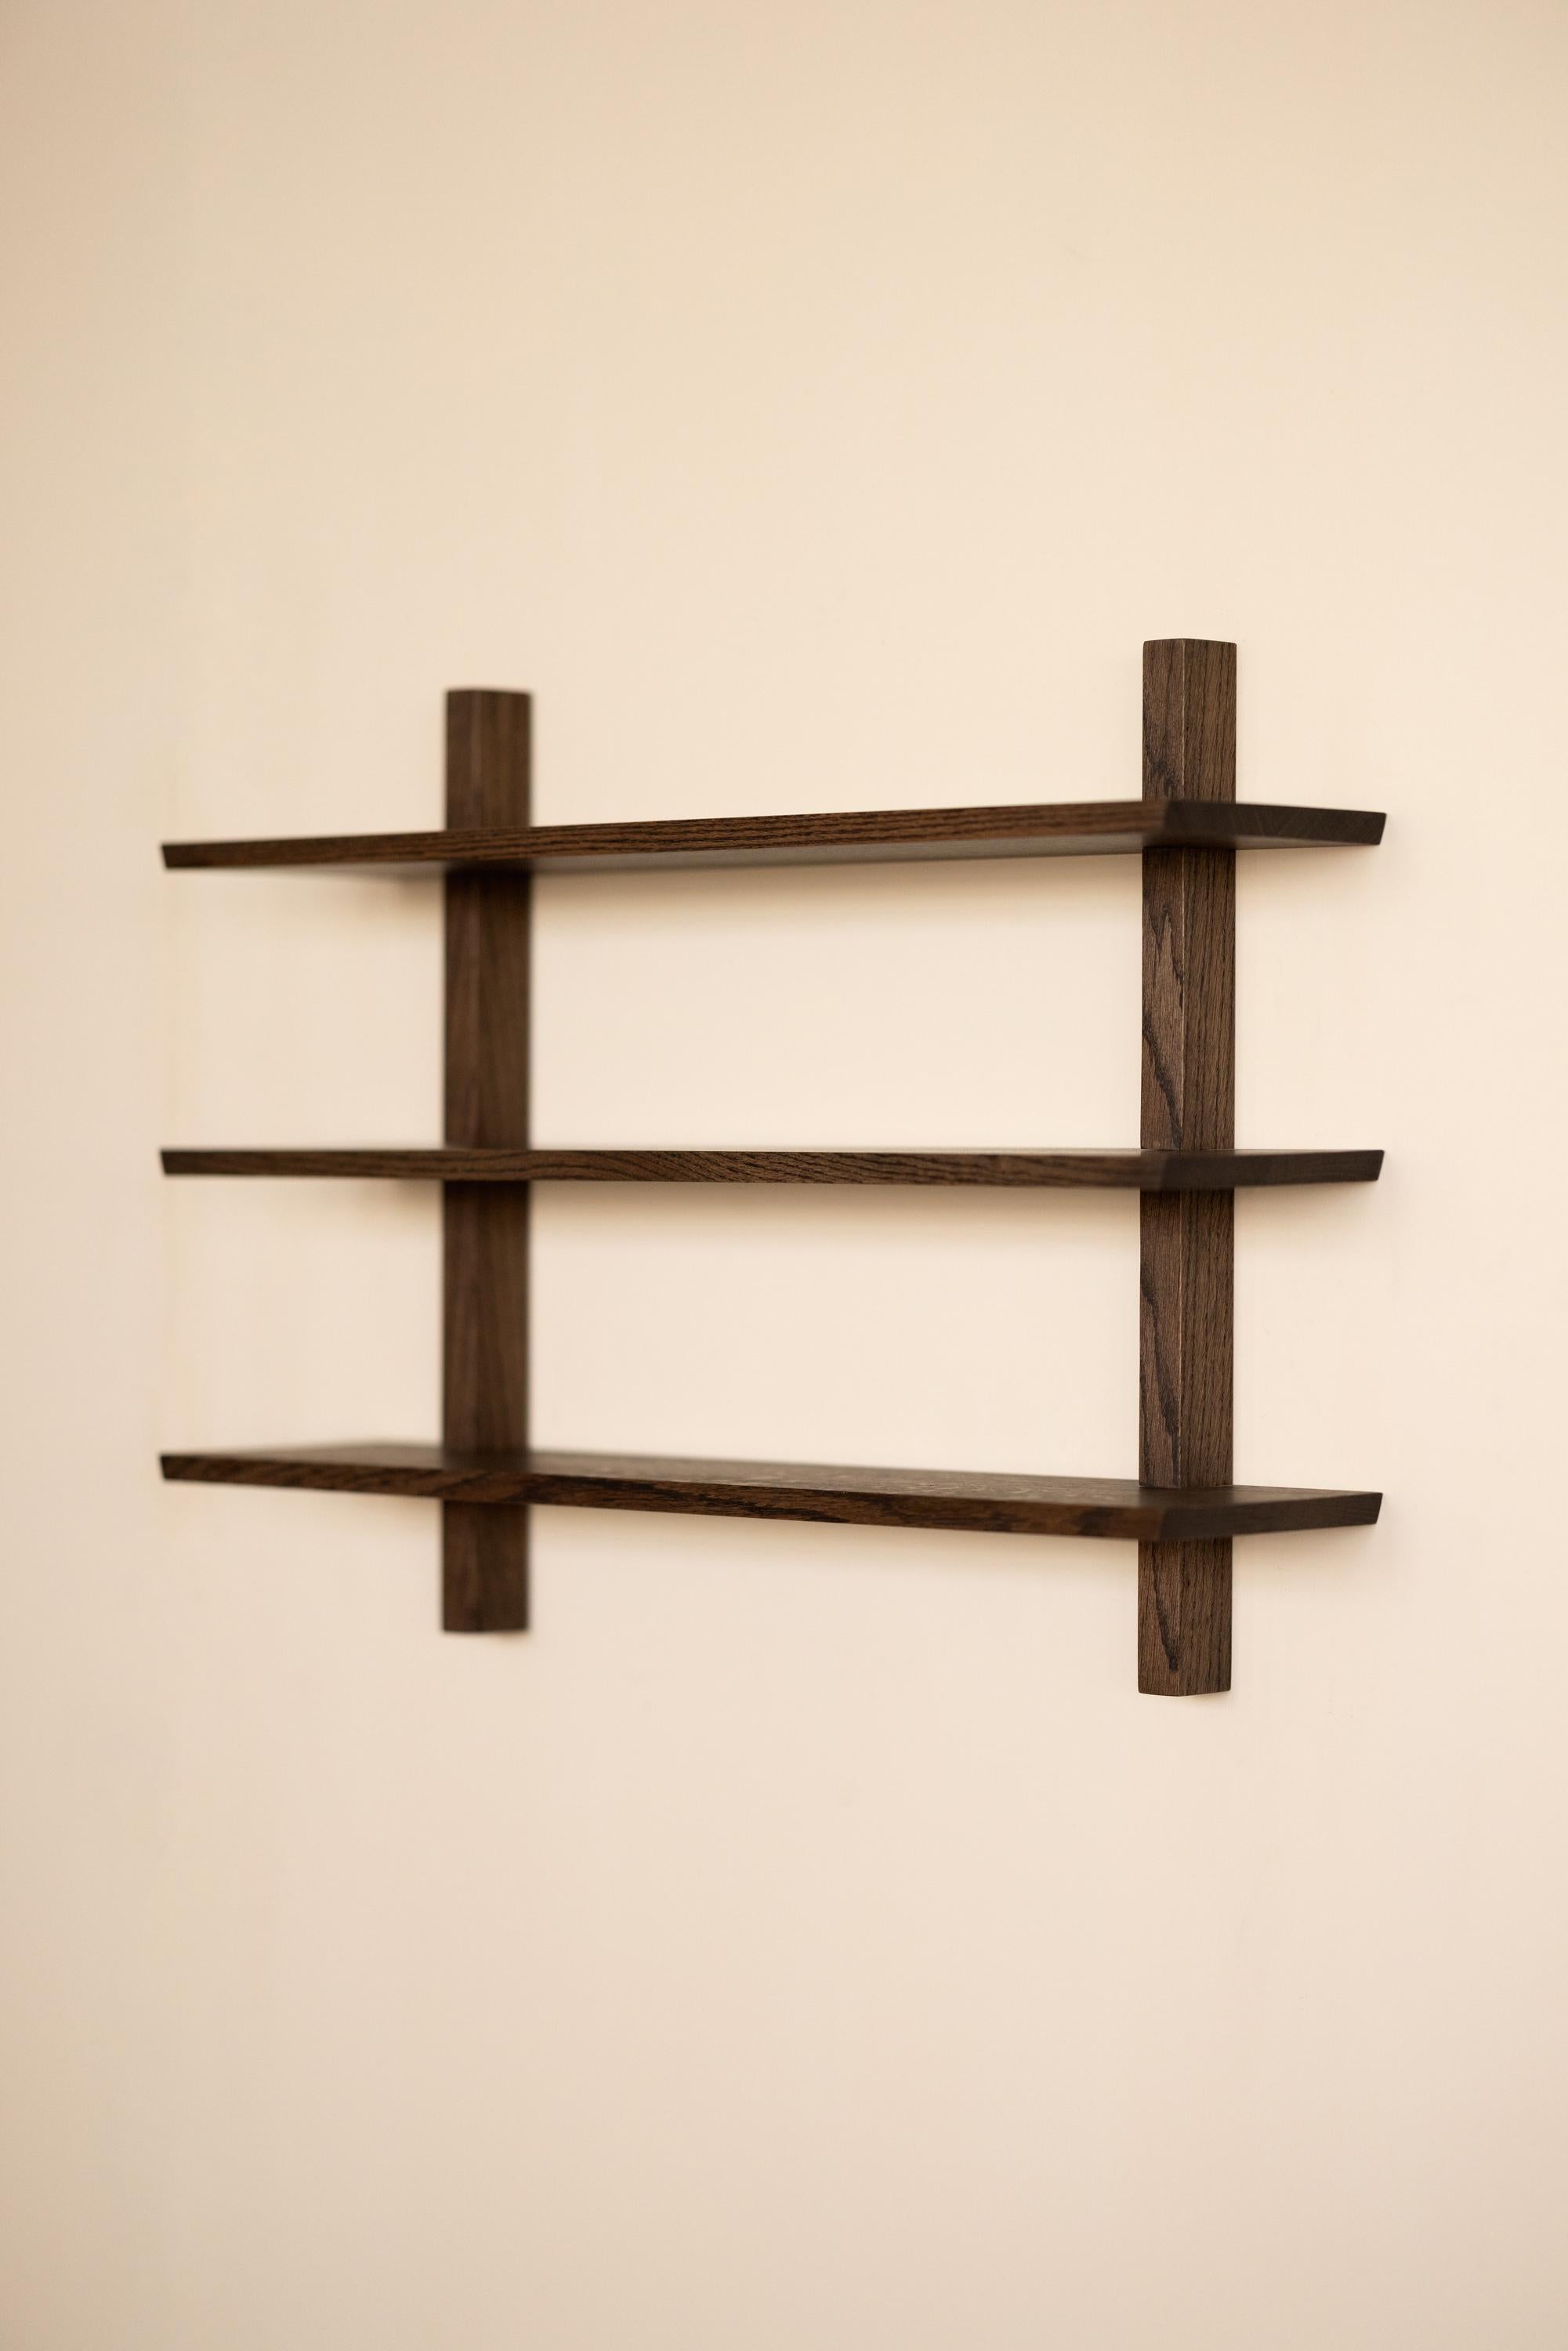 This Floating Shelving Unit offers a new and modern take on Mid-century wall storage. Defined by sturdiness and minimalism, this Still Life floating shelving unit is available in natural walnut or stained oak. 

What is now called a 